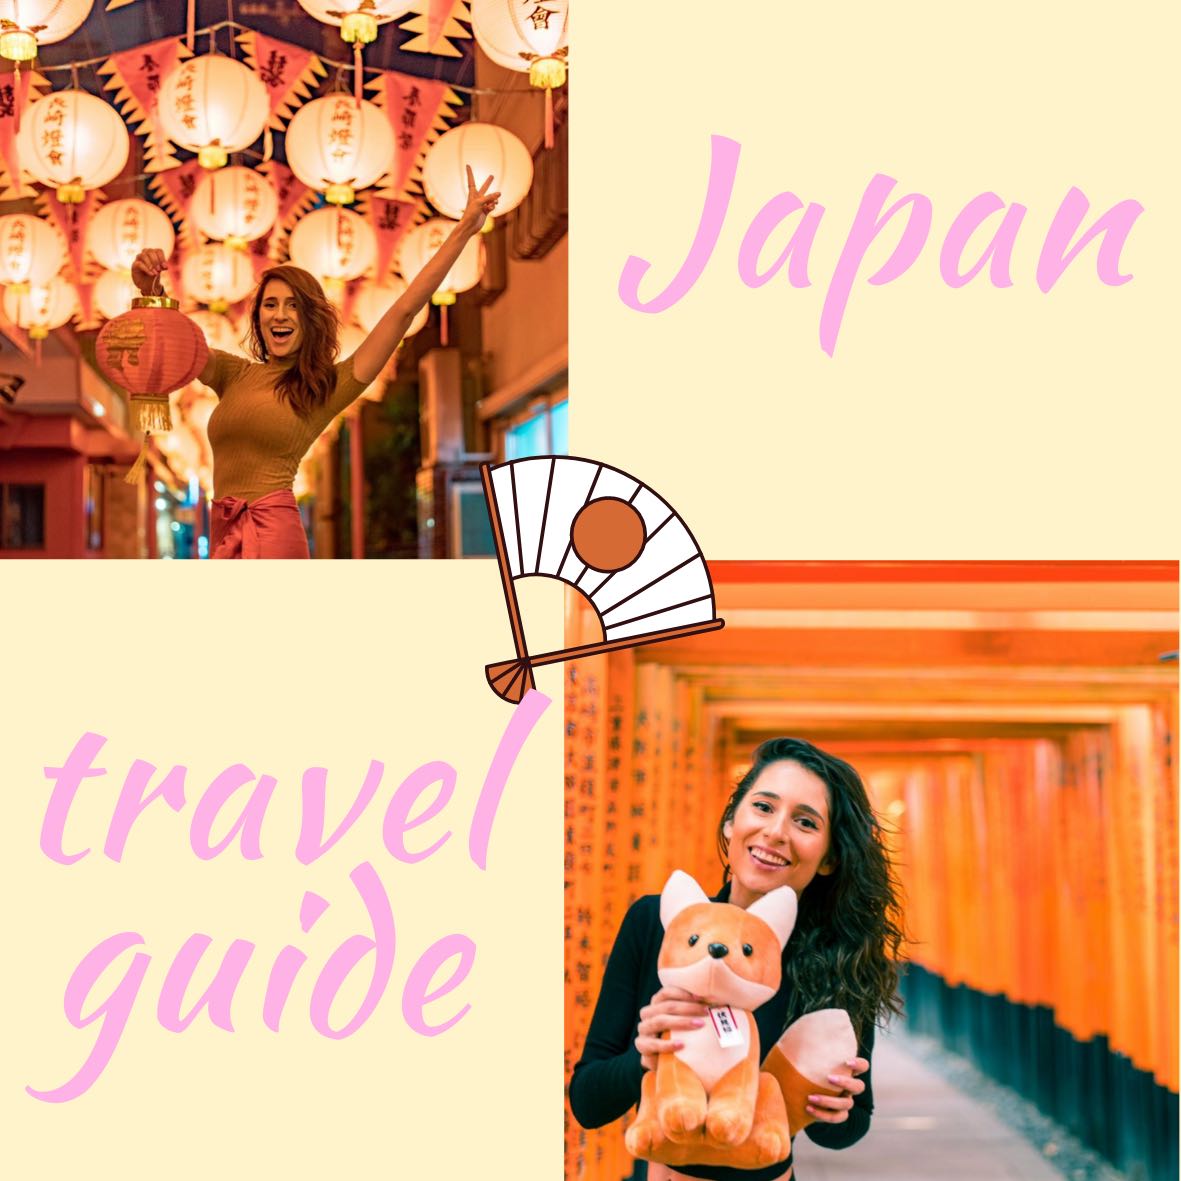 Japan travel guide with alyne